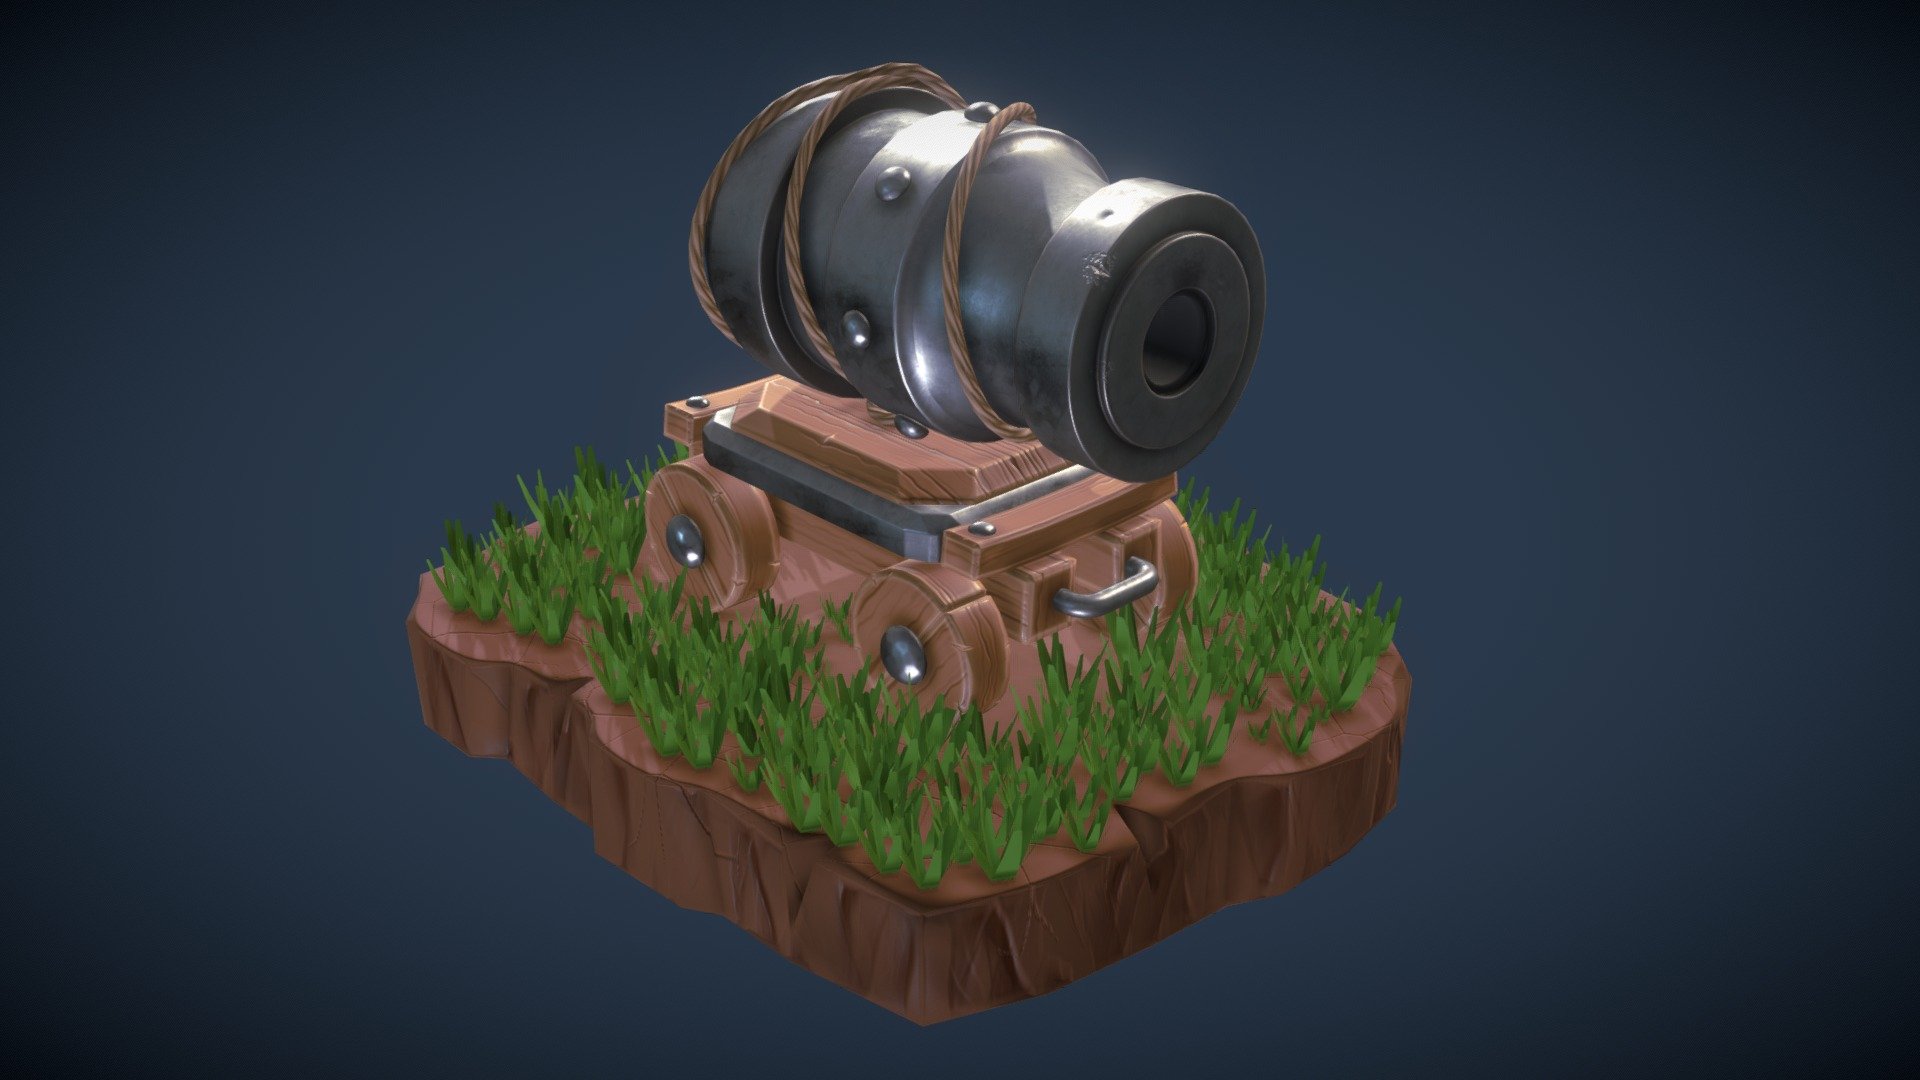 3D modeling of Clash of Clans cannon cart made in Blender and textured into Substance 3D painter, all special thanks to Marcos Britto from InsightZ 3d model